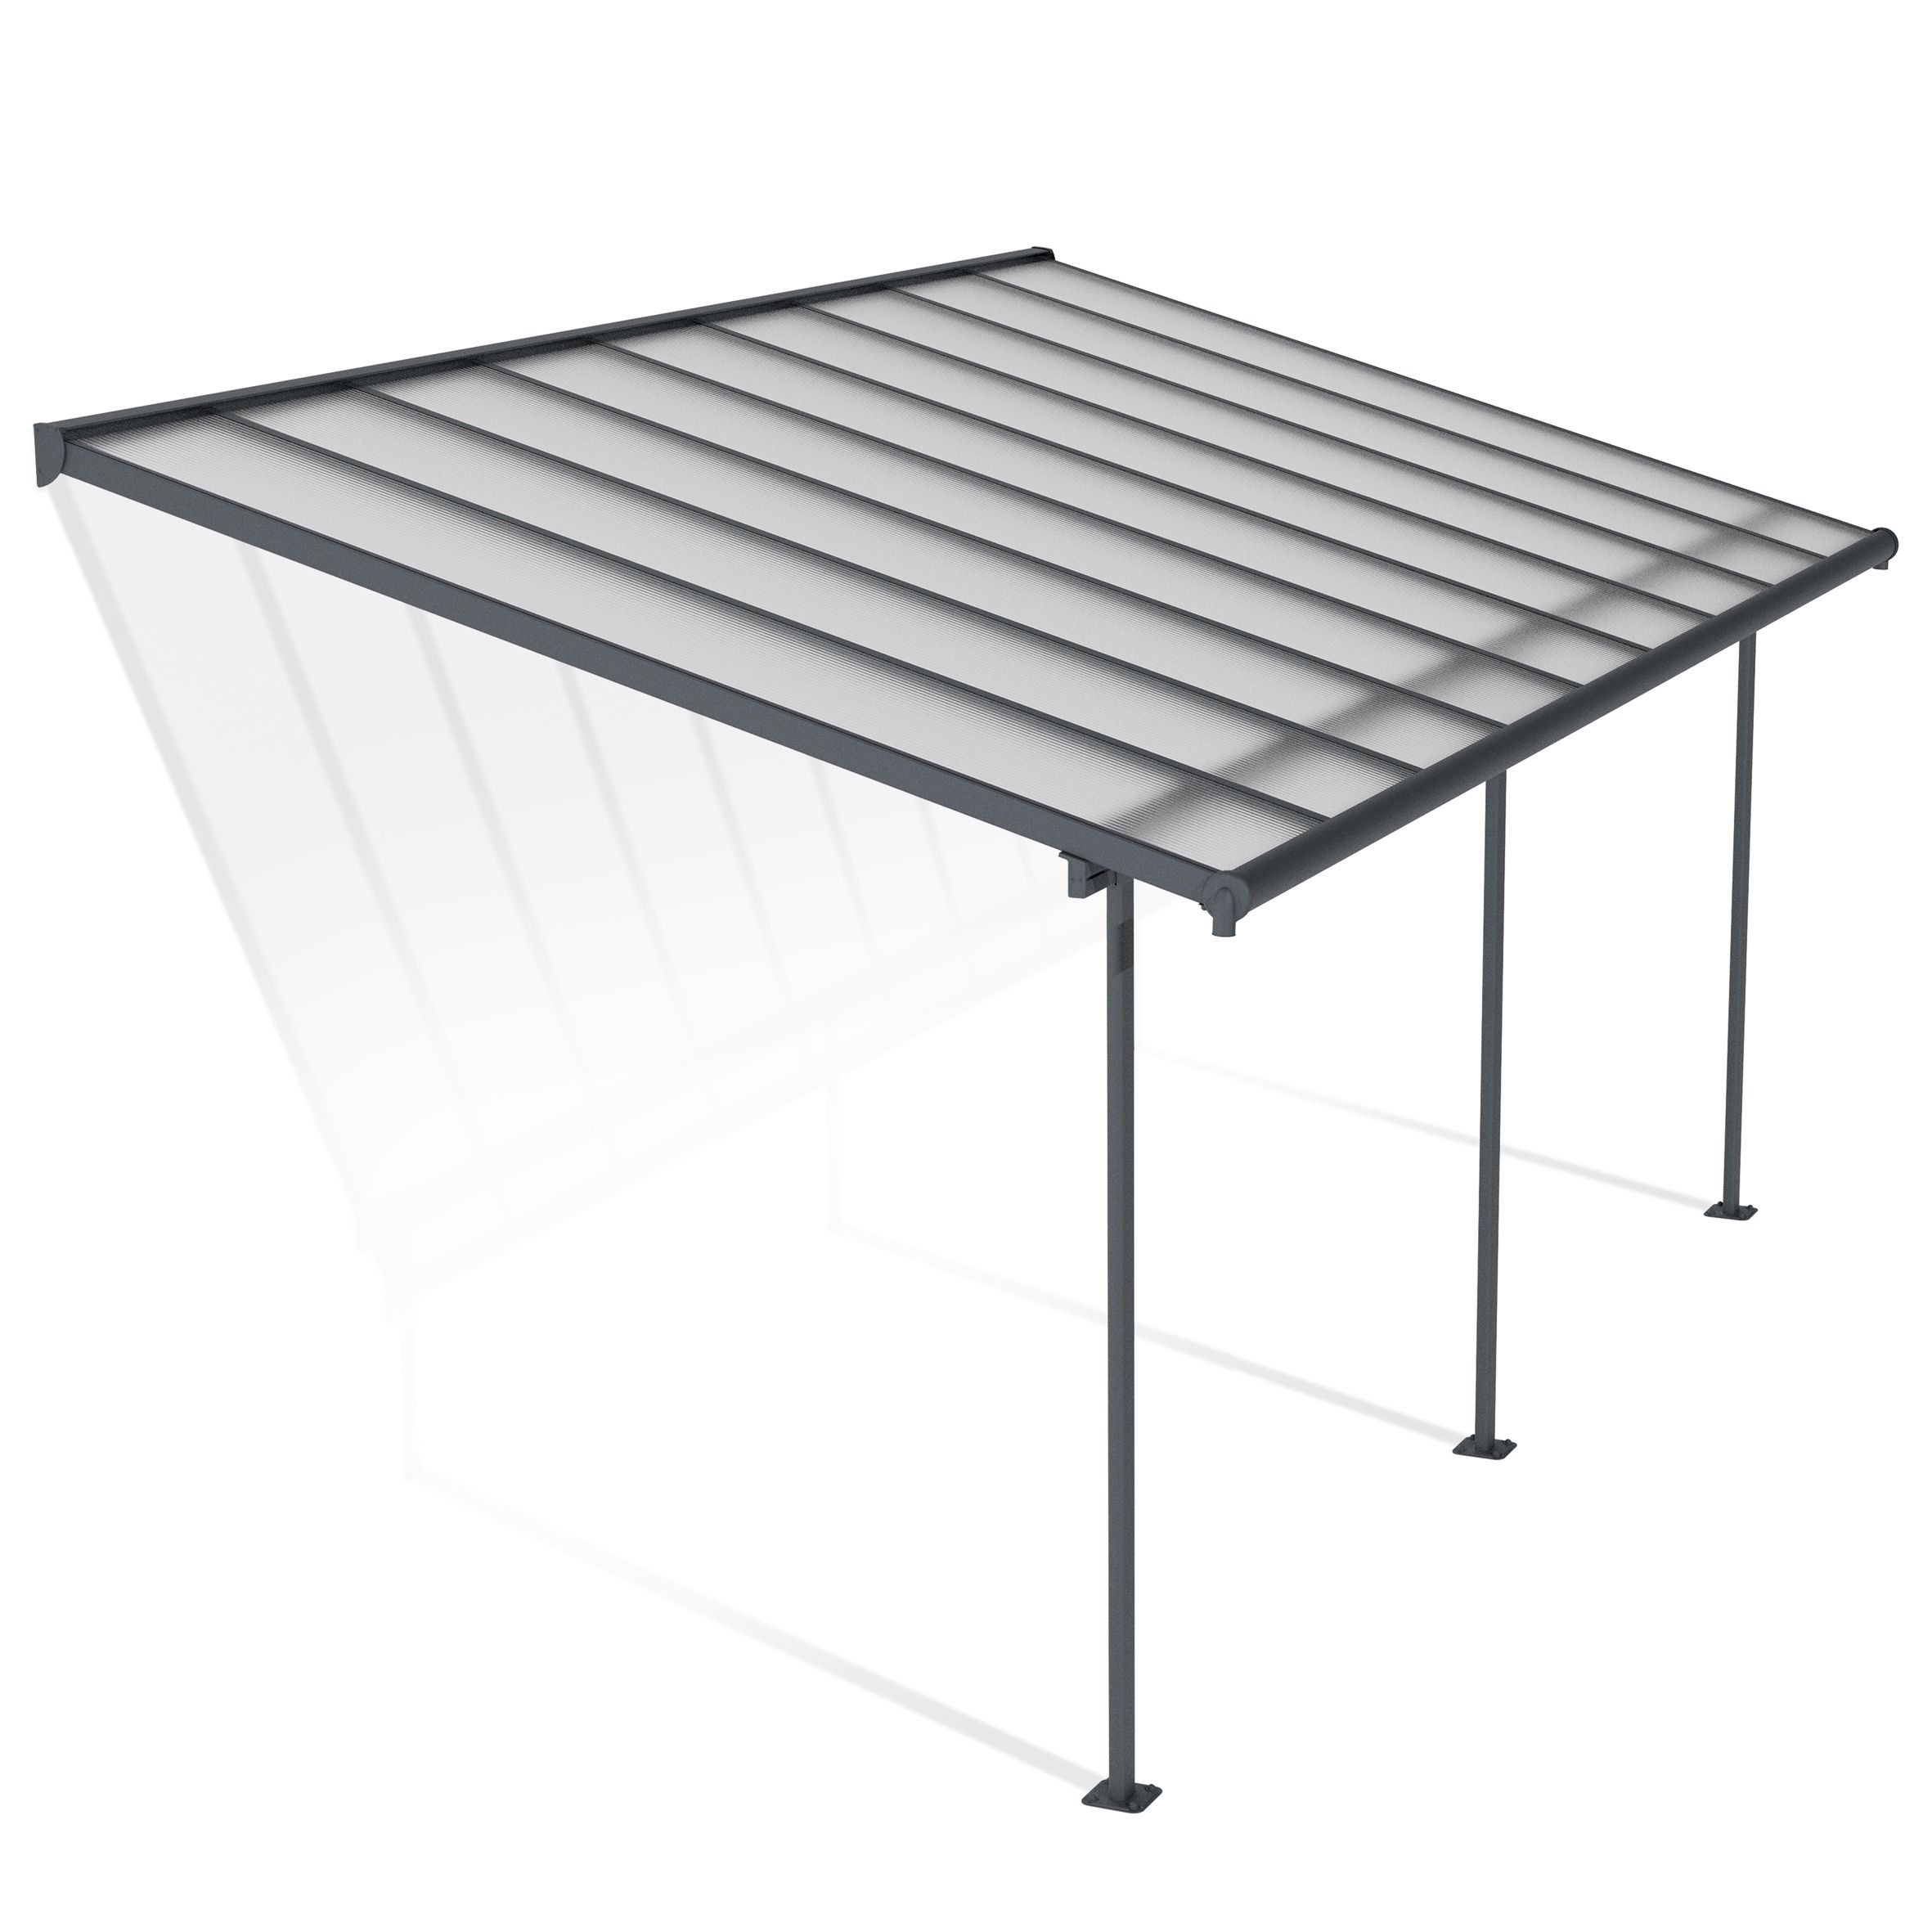 Palram - Canopia Grey Patio cover (H)3050mm (W)2990mm (D)5550mm